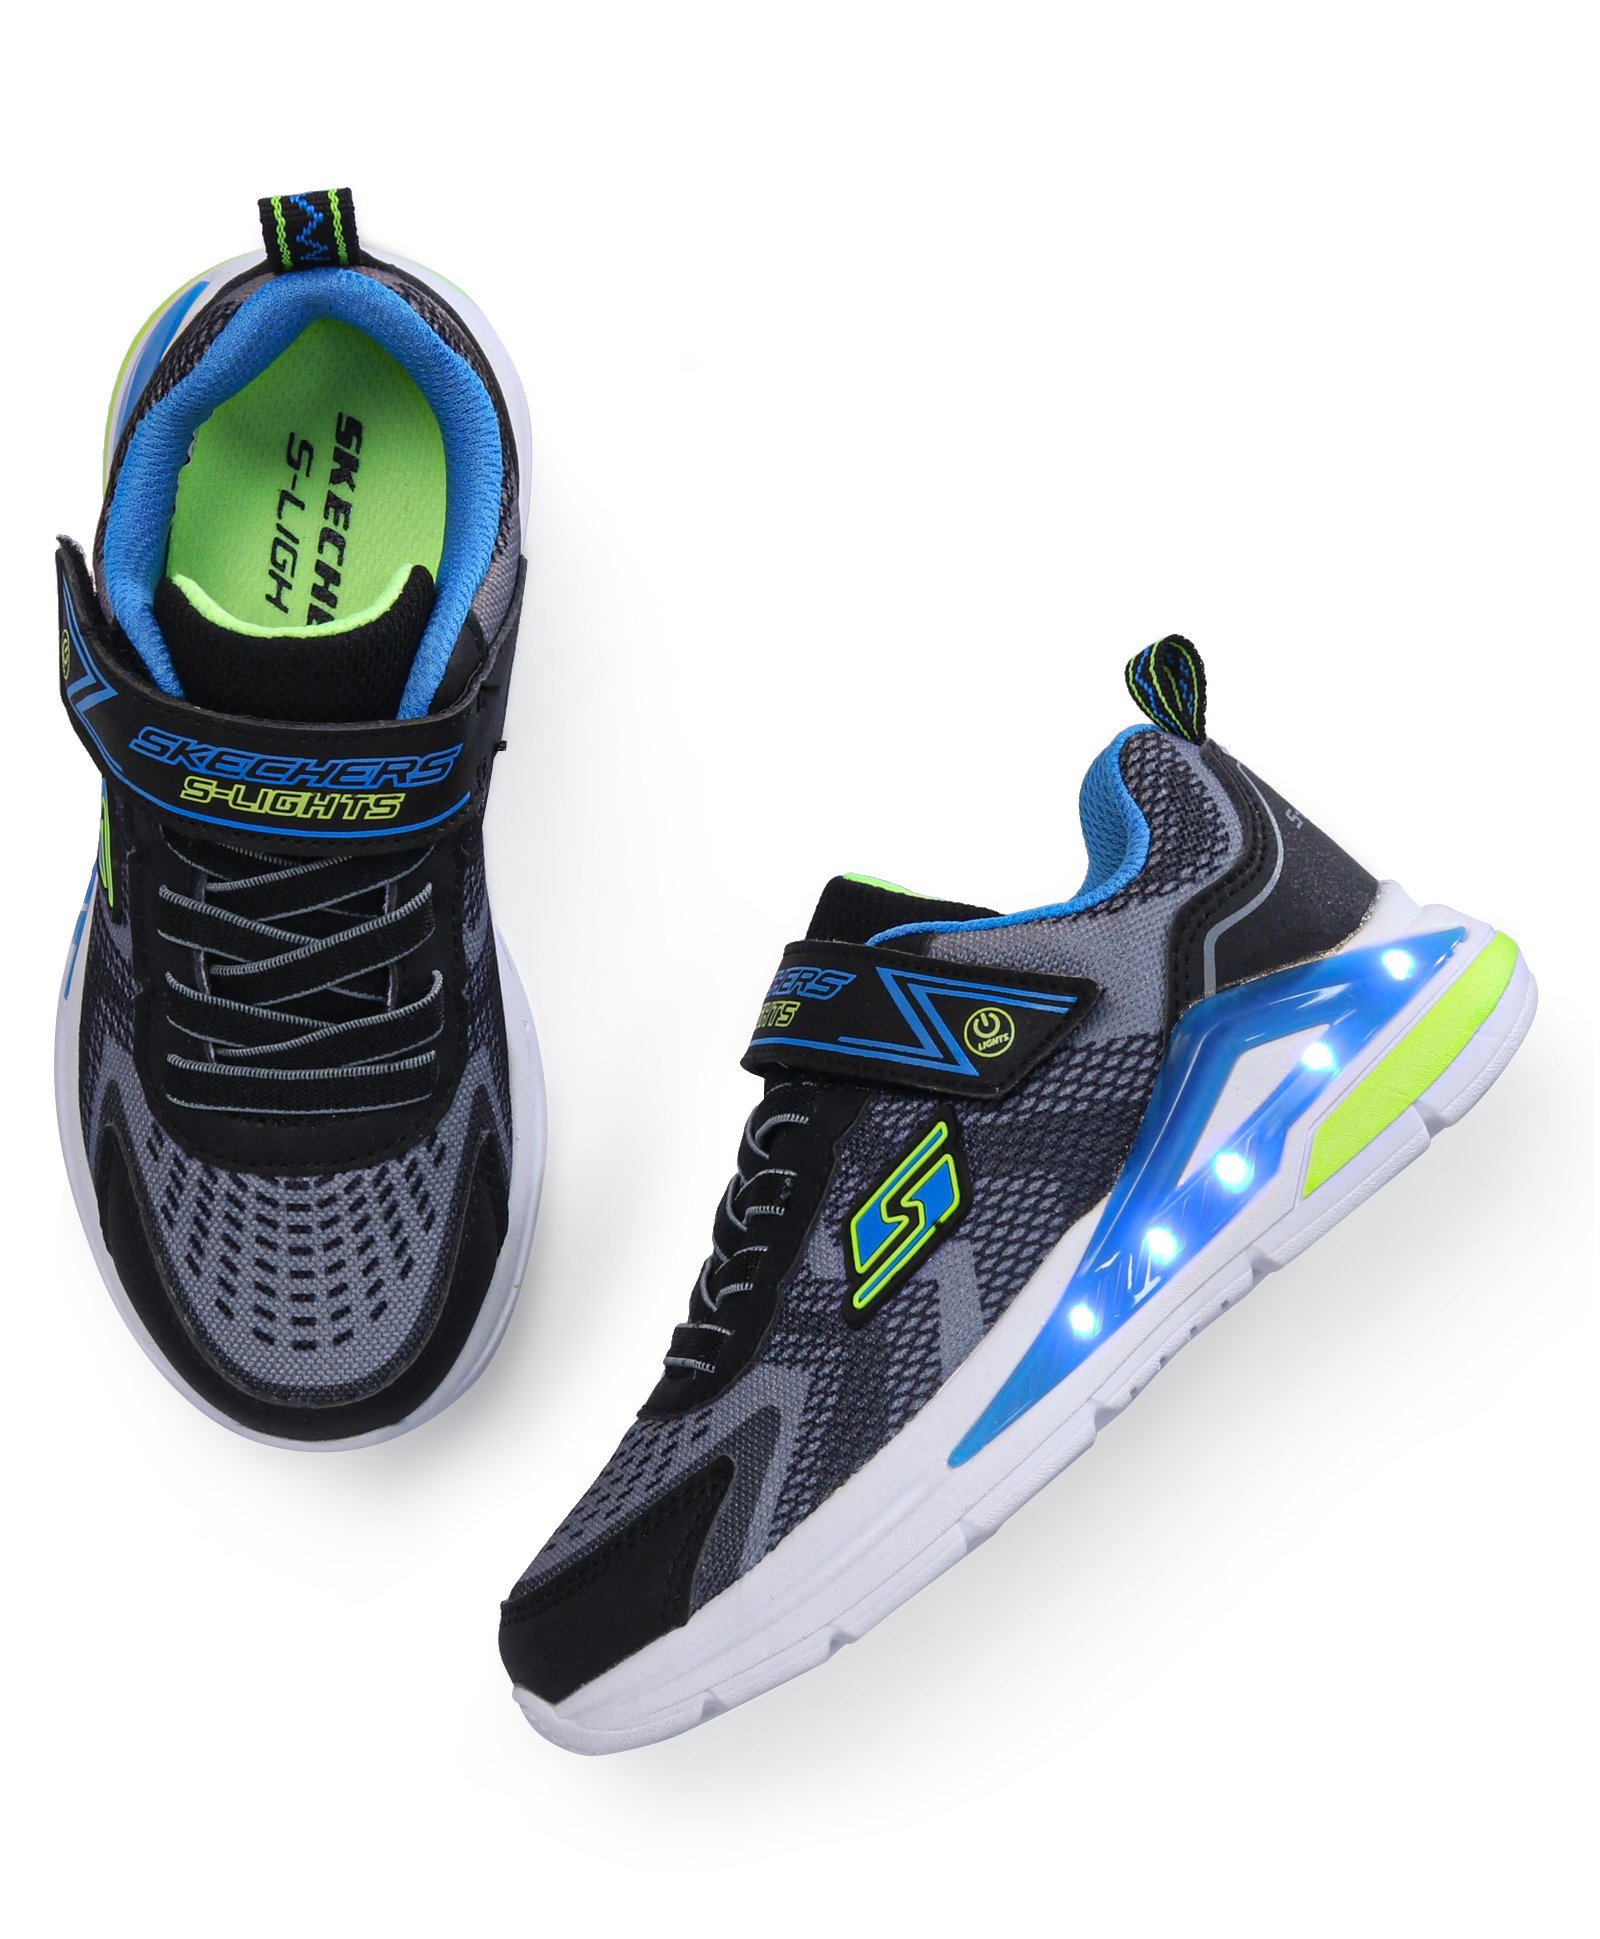 Buy Tri Namics LED Shoes with Velcro Closure - Black Yellow & Blue for Boys (4-5 Years) Online, Shop at FirstCry.com - 13337204